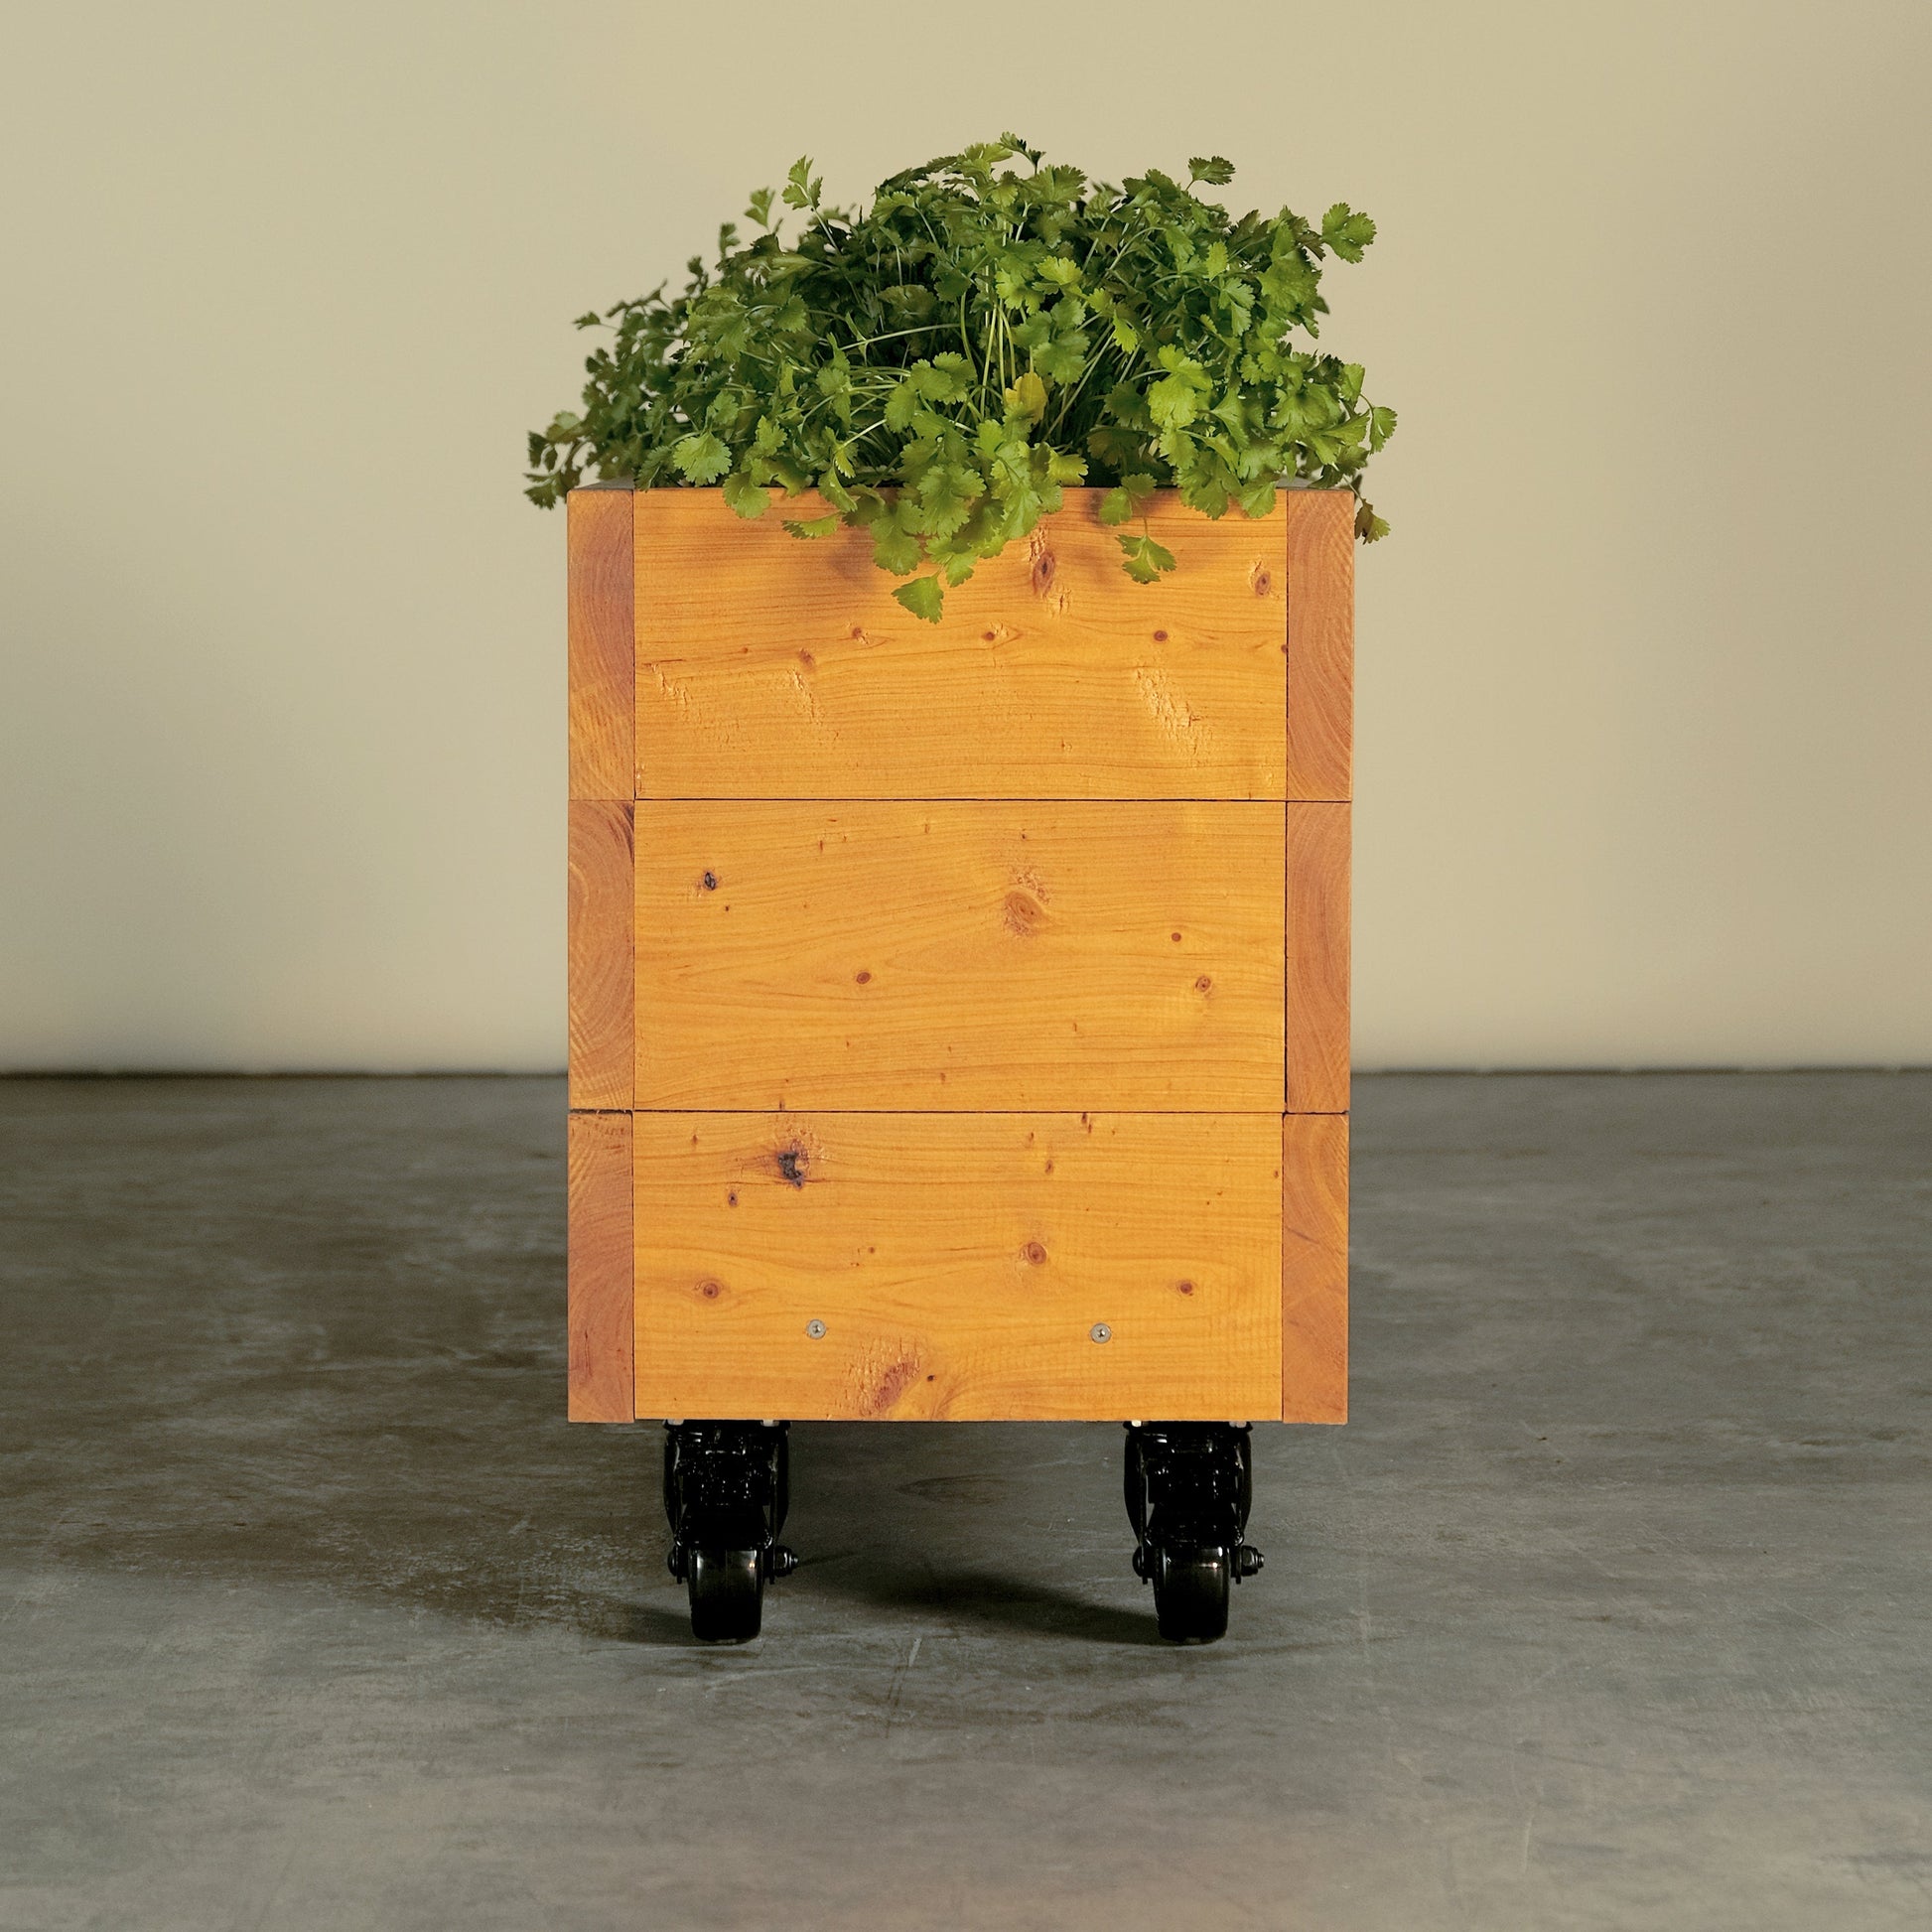 skinny end of our herb junior timber veggie box on wheels. Wide enough to plant your herbs and plants but small enough for tight spaces, balconies, decks, terraces and rooftops. Its on wheels so you can roll it around all year and chase the sun. 